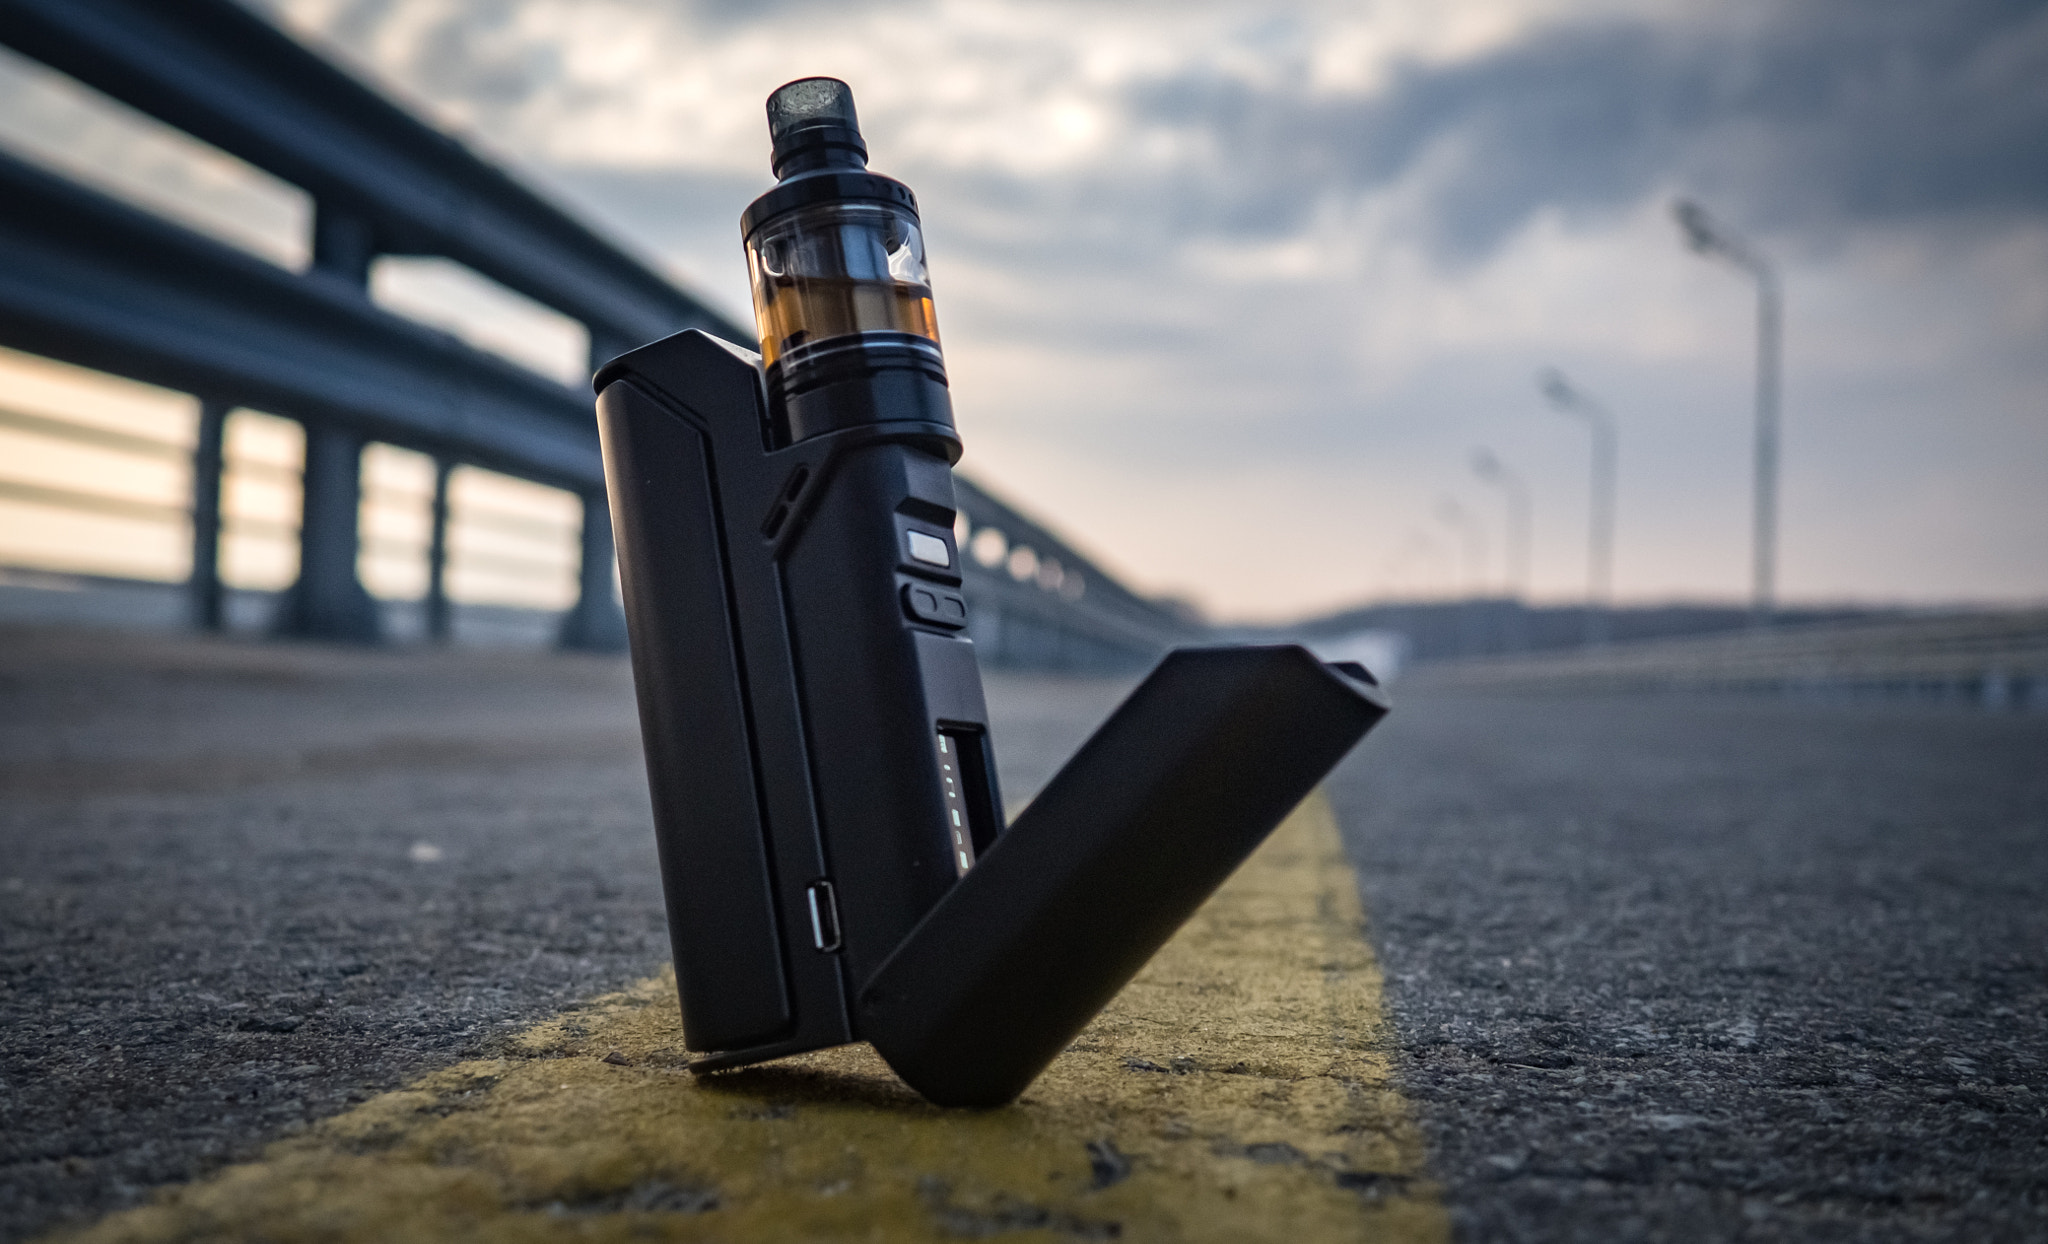 vaporizer on the background of the road and clouds